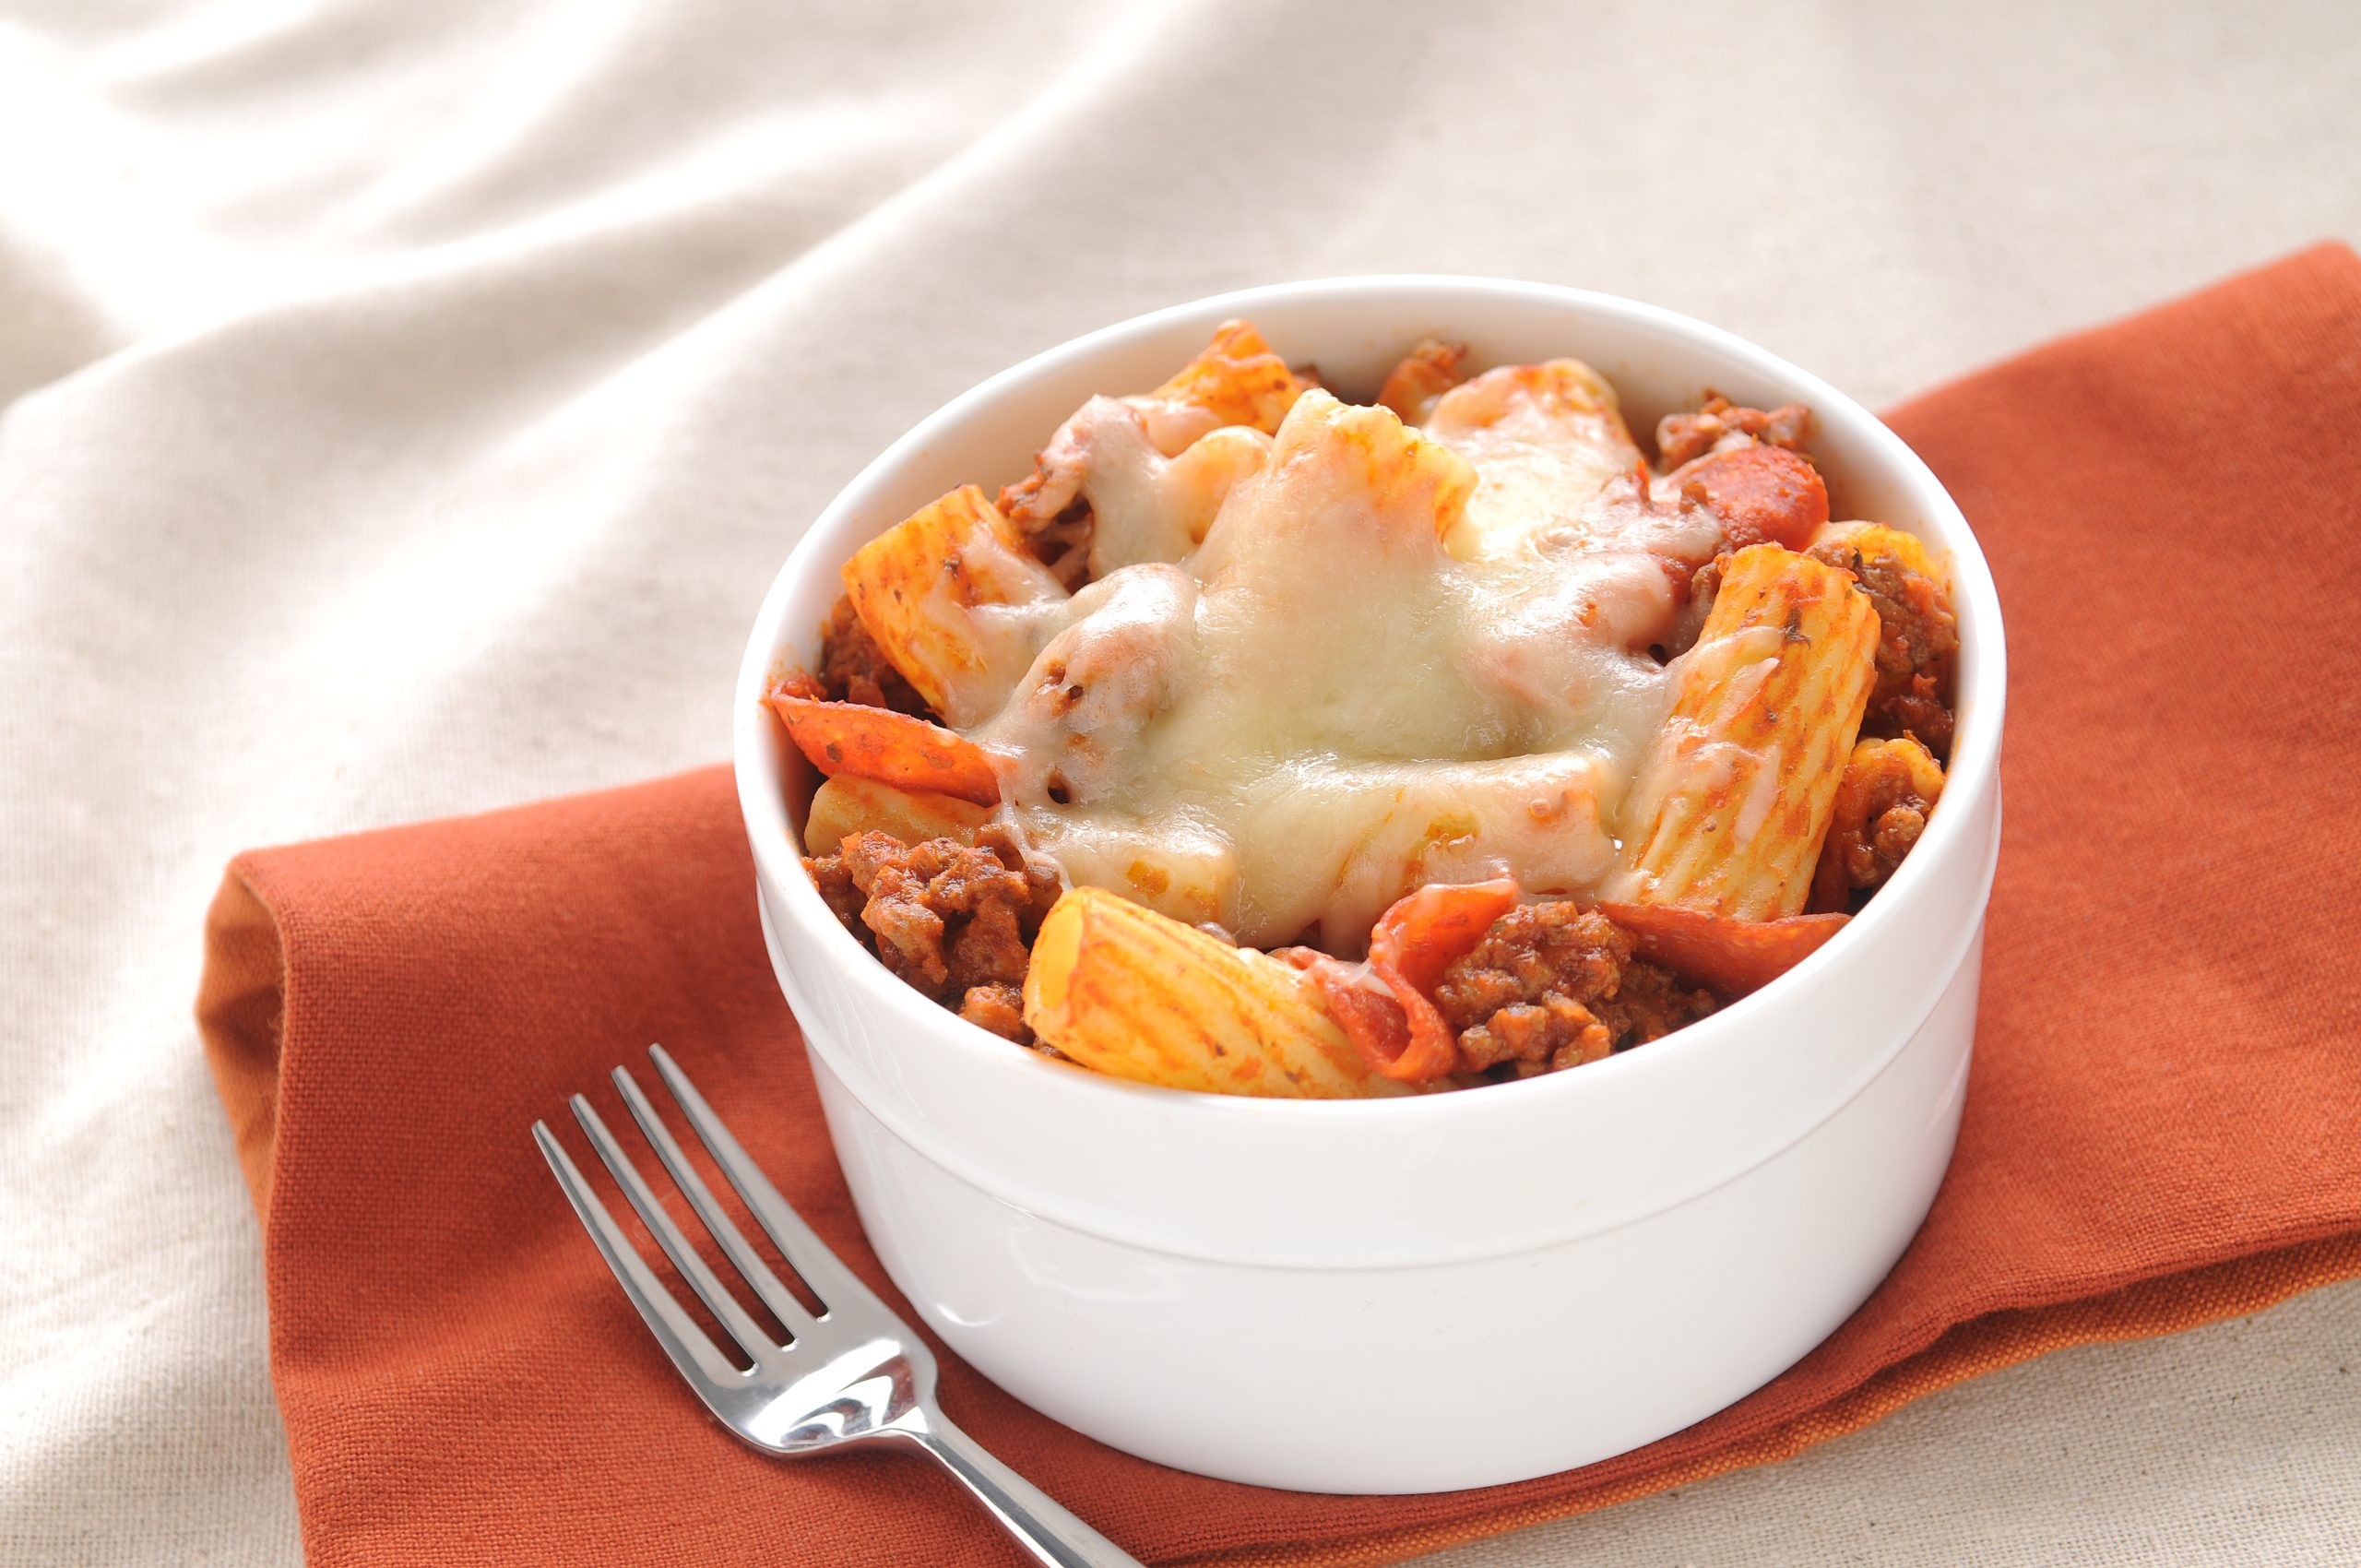 Pizza pasta with rigatoni, Italian sausage, pepperoni, sauce and cheese